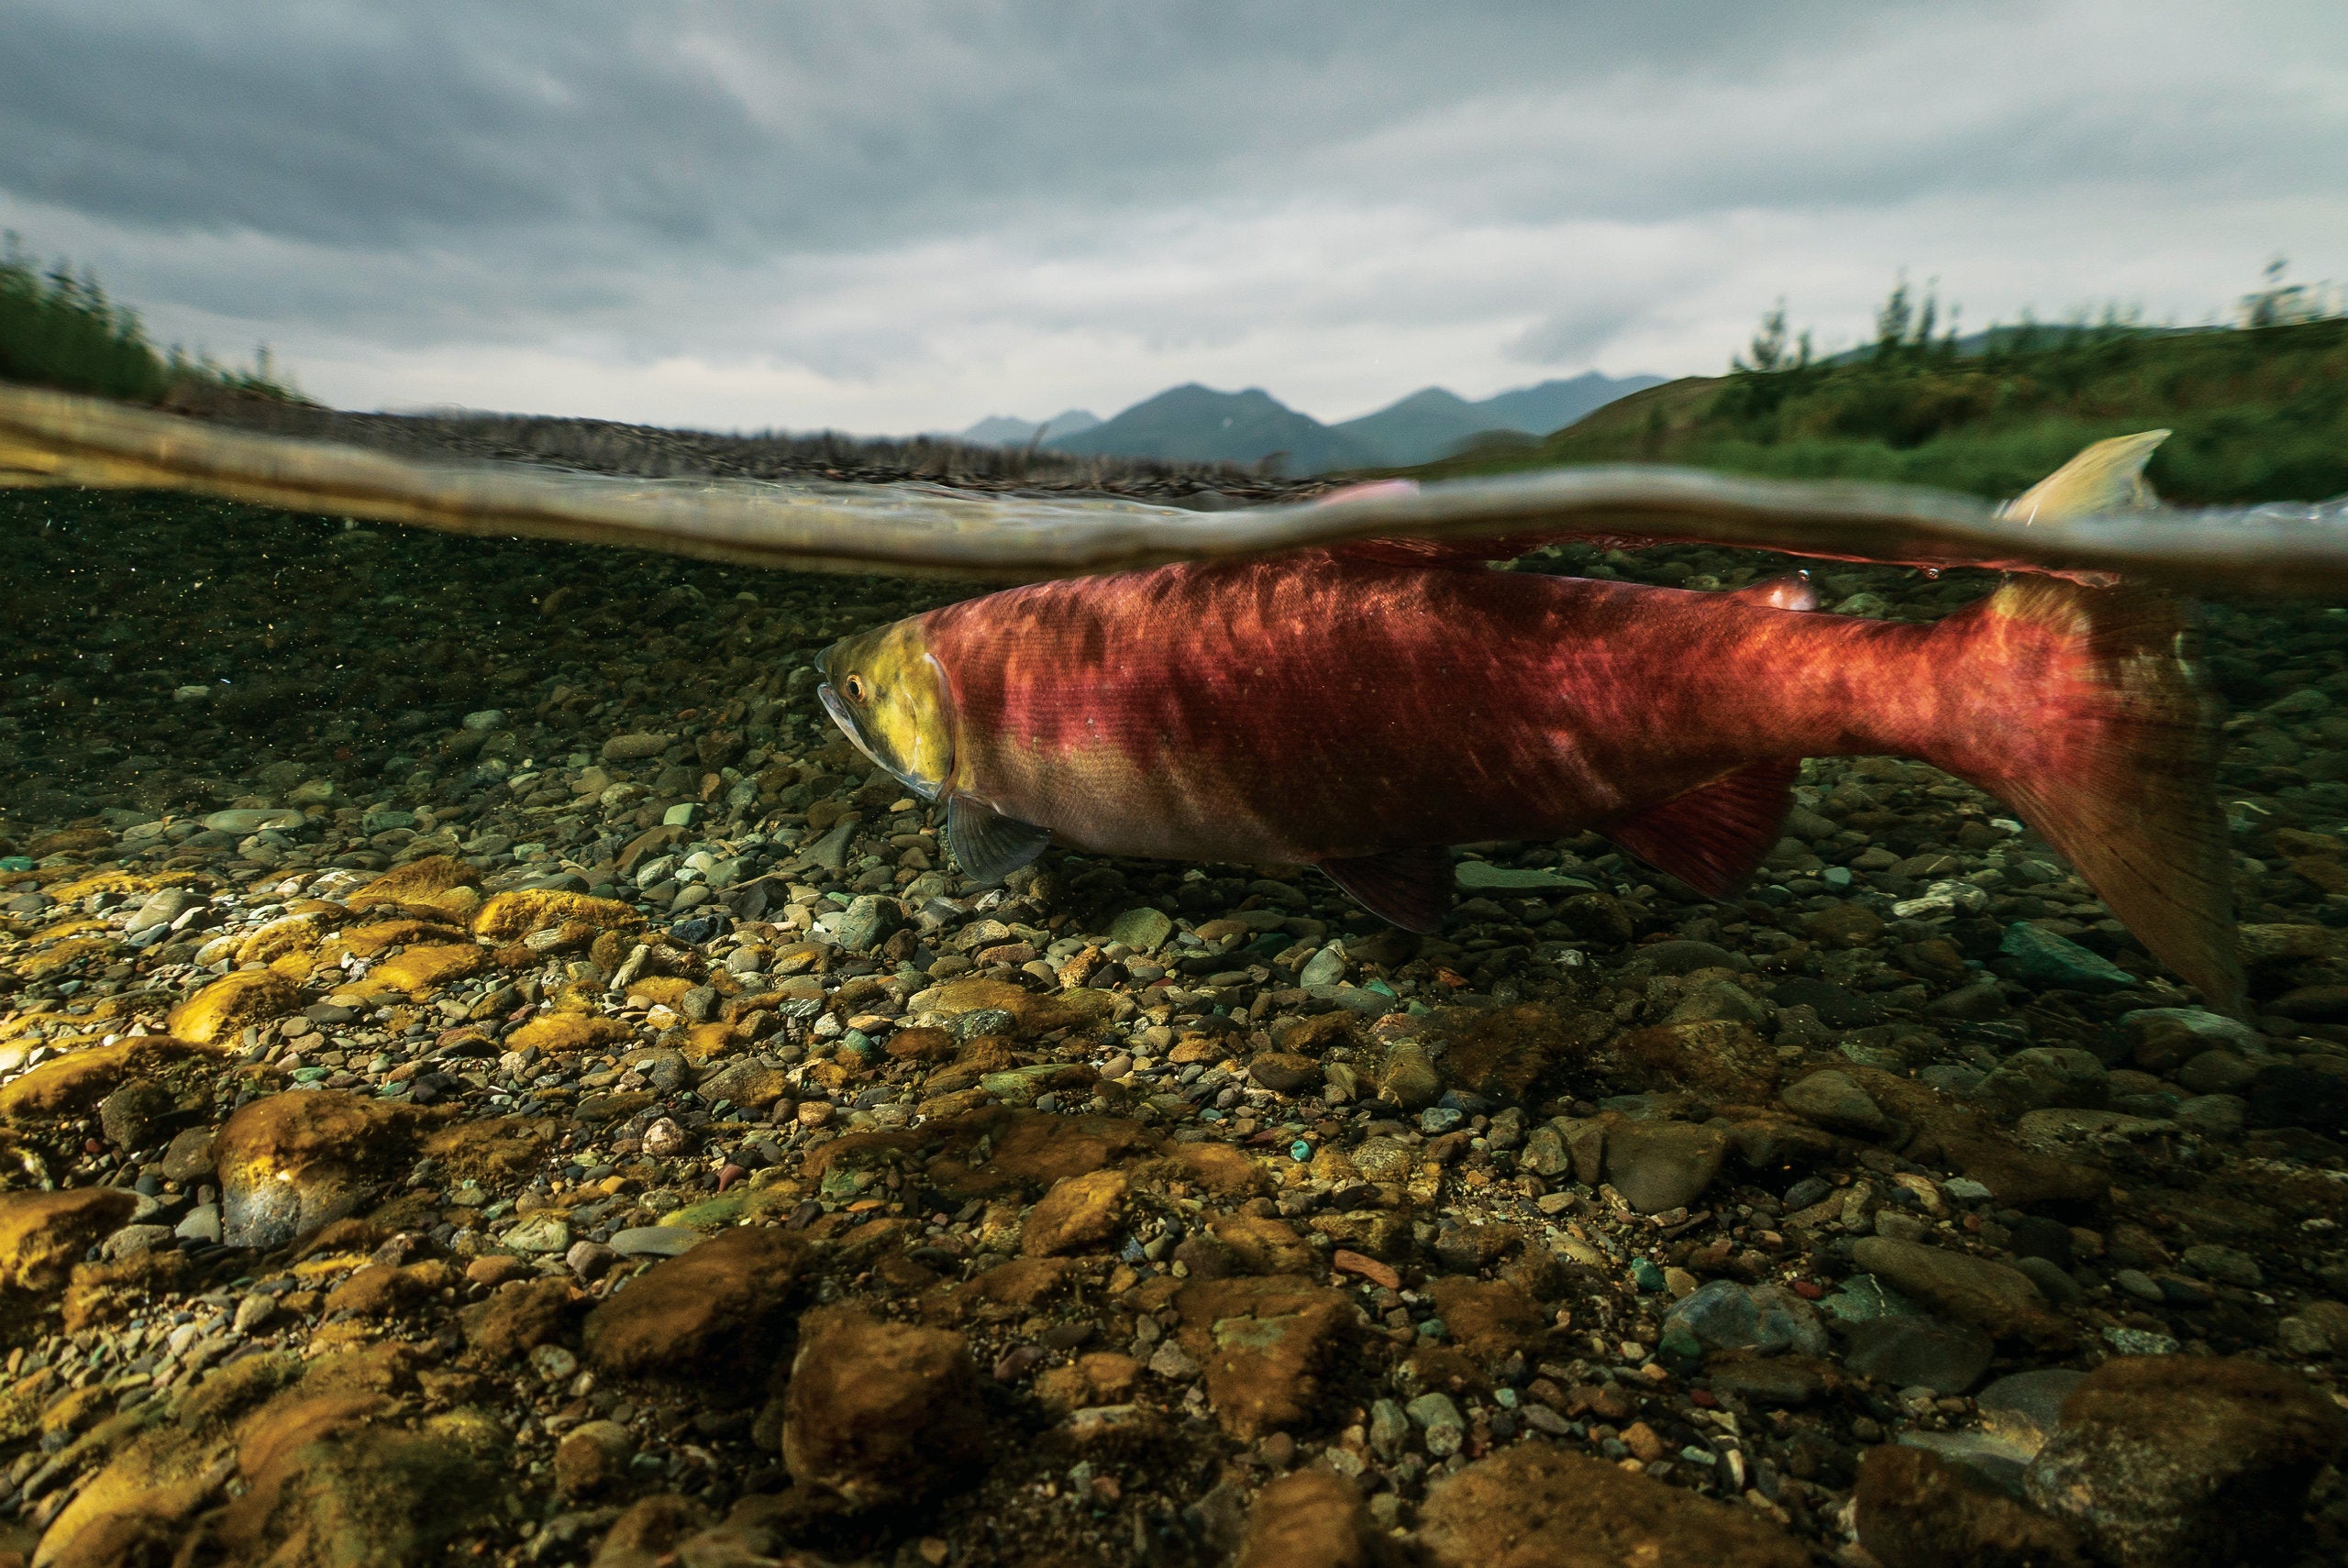 A partially underwater view of a socket salmon